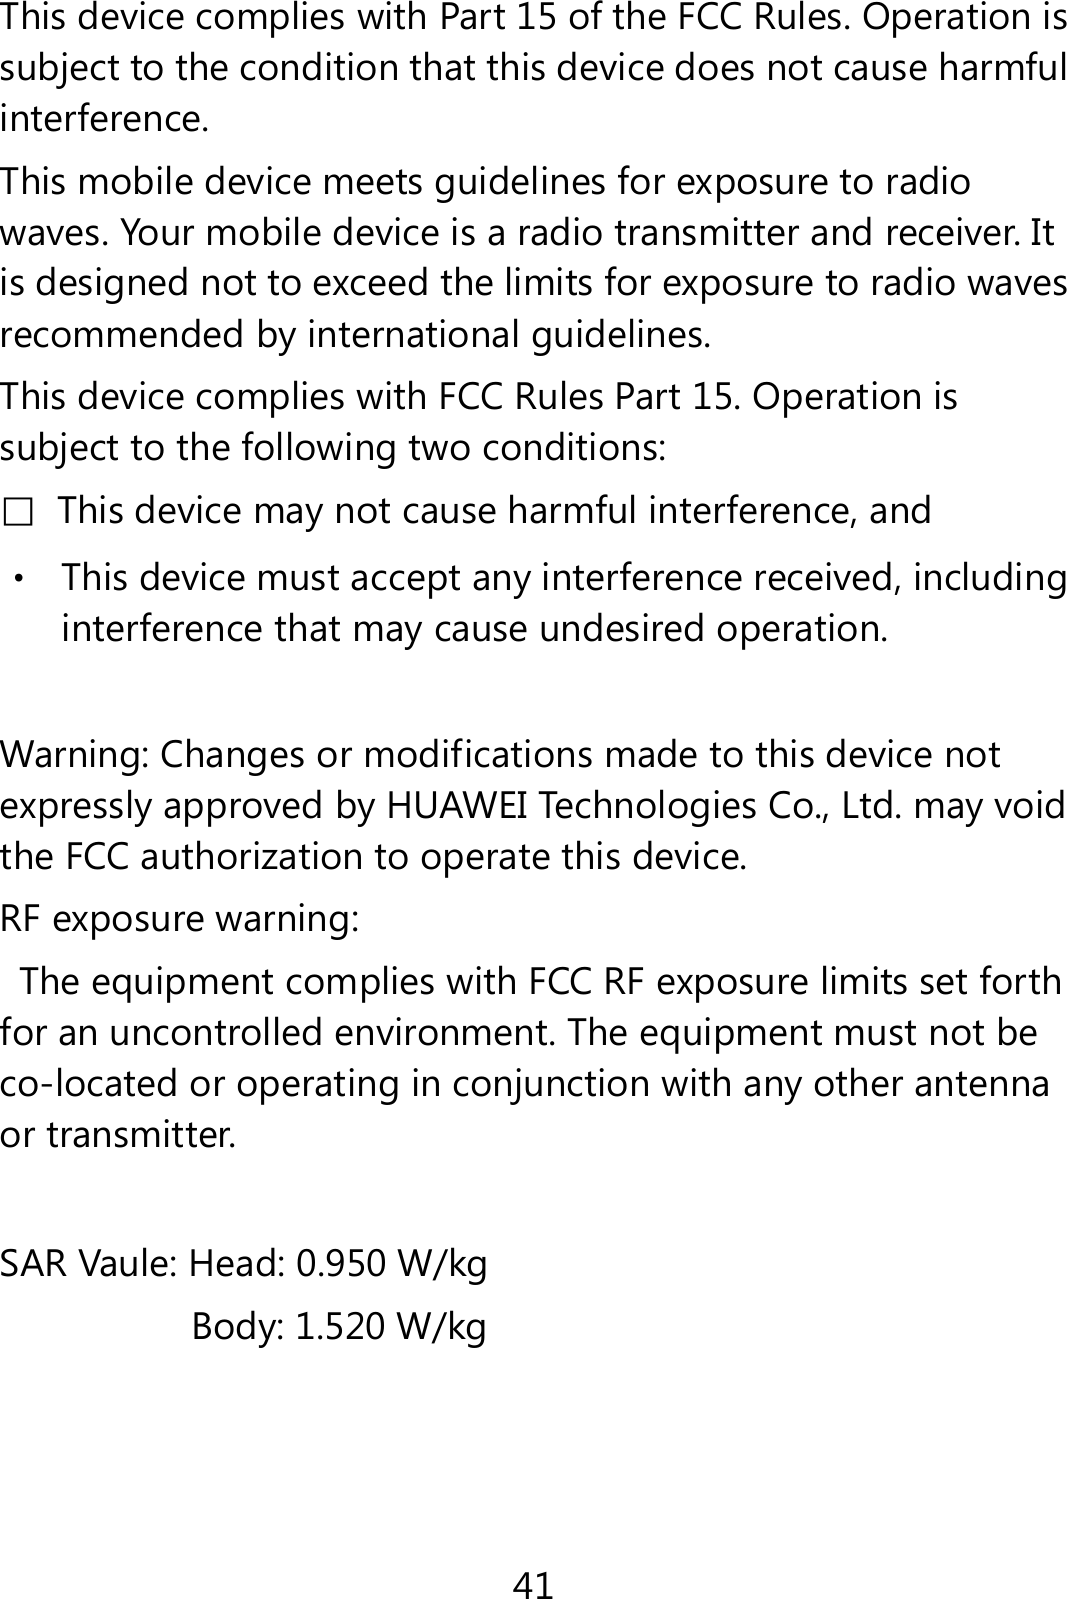 41 This device complies with Part 15 of the FCC Rules. Operation is subject to the condition that this device does not cause harmful interference. This mobile device meets guidelines for exposure to radio waves. Your mobile device is a radio transmitter and receiver. It is designed not to exceed the limits for exposure to radio waves recommended by international guidelines. This device complies with FCC Rules Part 15. Operation is subject to the following two conditions: □  This device may not cause harmful interference, and ‧ This device must accept any interference received, including interference that may cause undesired operation.  Warning: Changes or modifications made to this device not expressly approved by HUAWEI Technologies Co., Ltd. may void the FCC authorization to operate this device. RF exposure warning:   The equipment complies with FCC RF exposure limits set forth for an uncontrolled environment. The equipment must not be co-located or operating in conjunction with any other antenna or transmitter. SAR Vaule: Head: 0.950 W/kg Body: 1.520 W/kg  